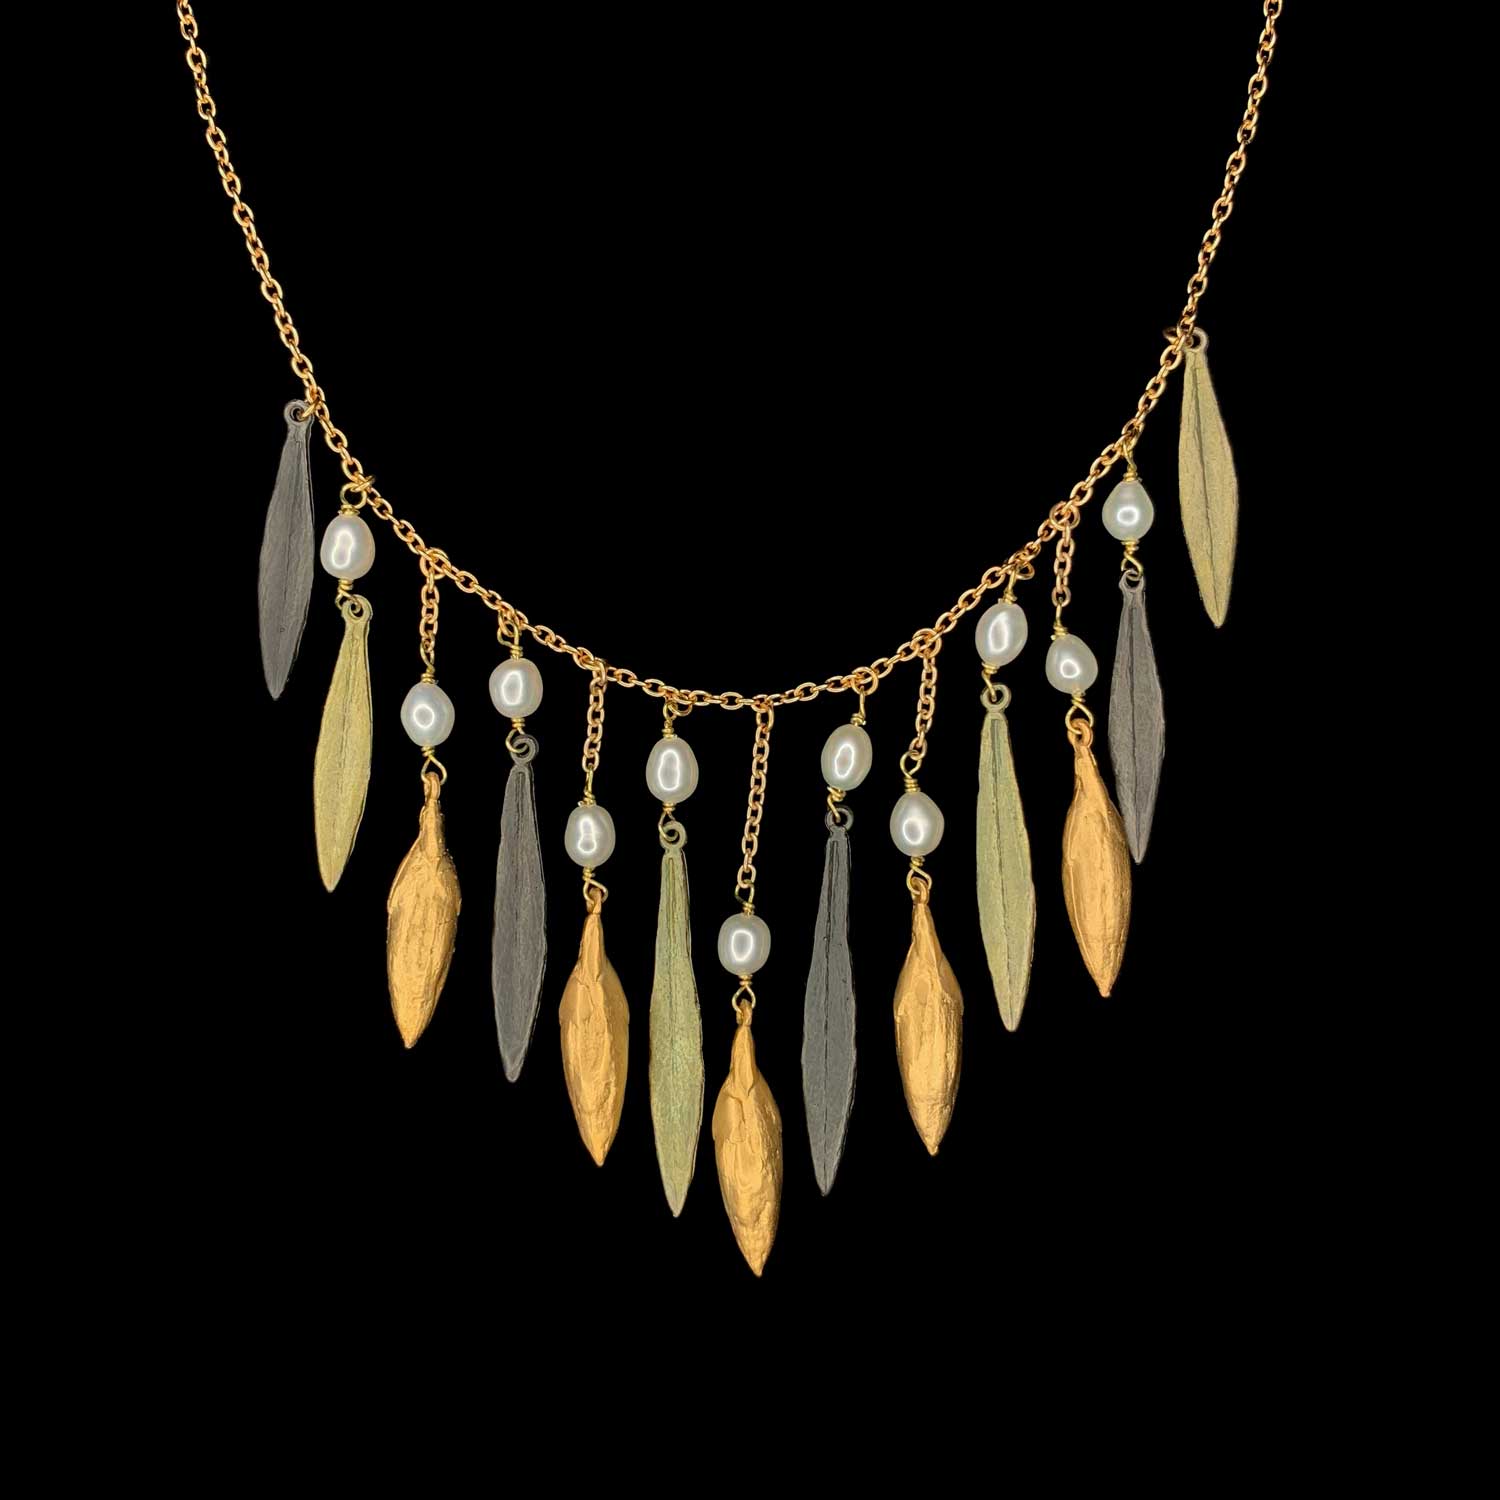 Leaf and Bud Necklace - Statement